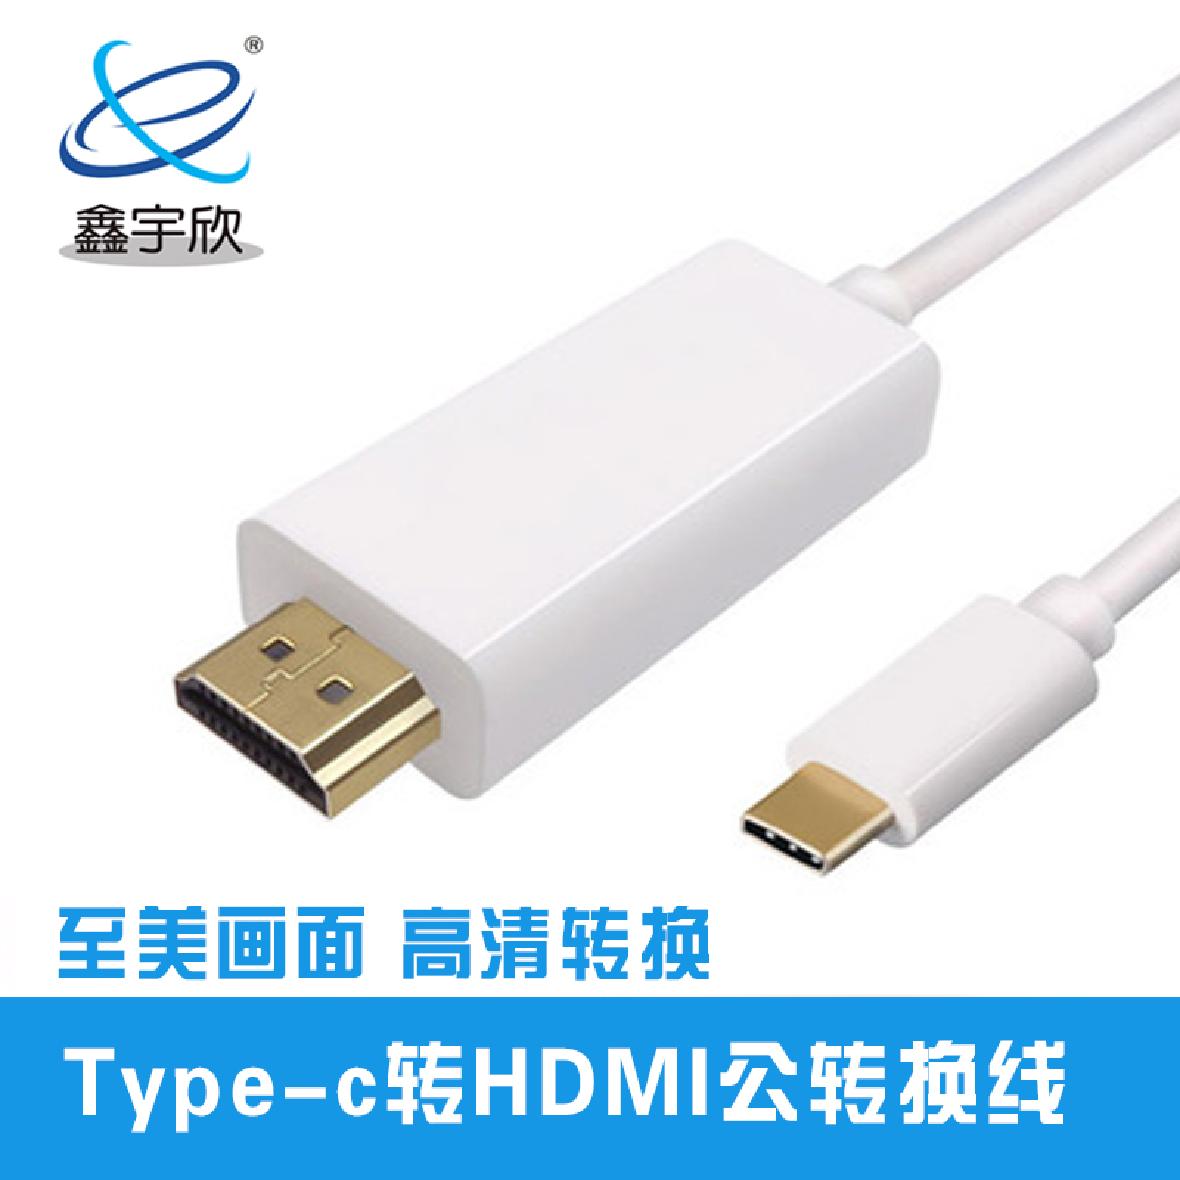  Type-c to hdmi high-definition cable USB3.1 TYPE-C male to HDMI male conversion cable 1080P high-definition signal